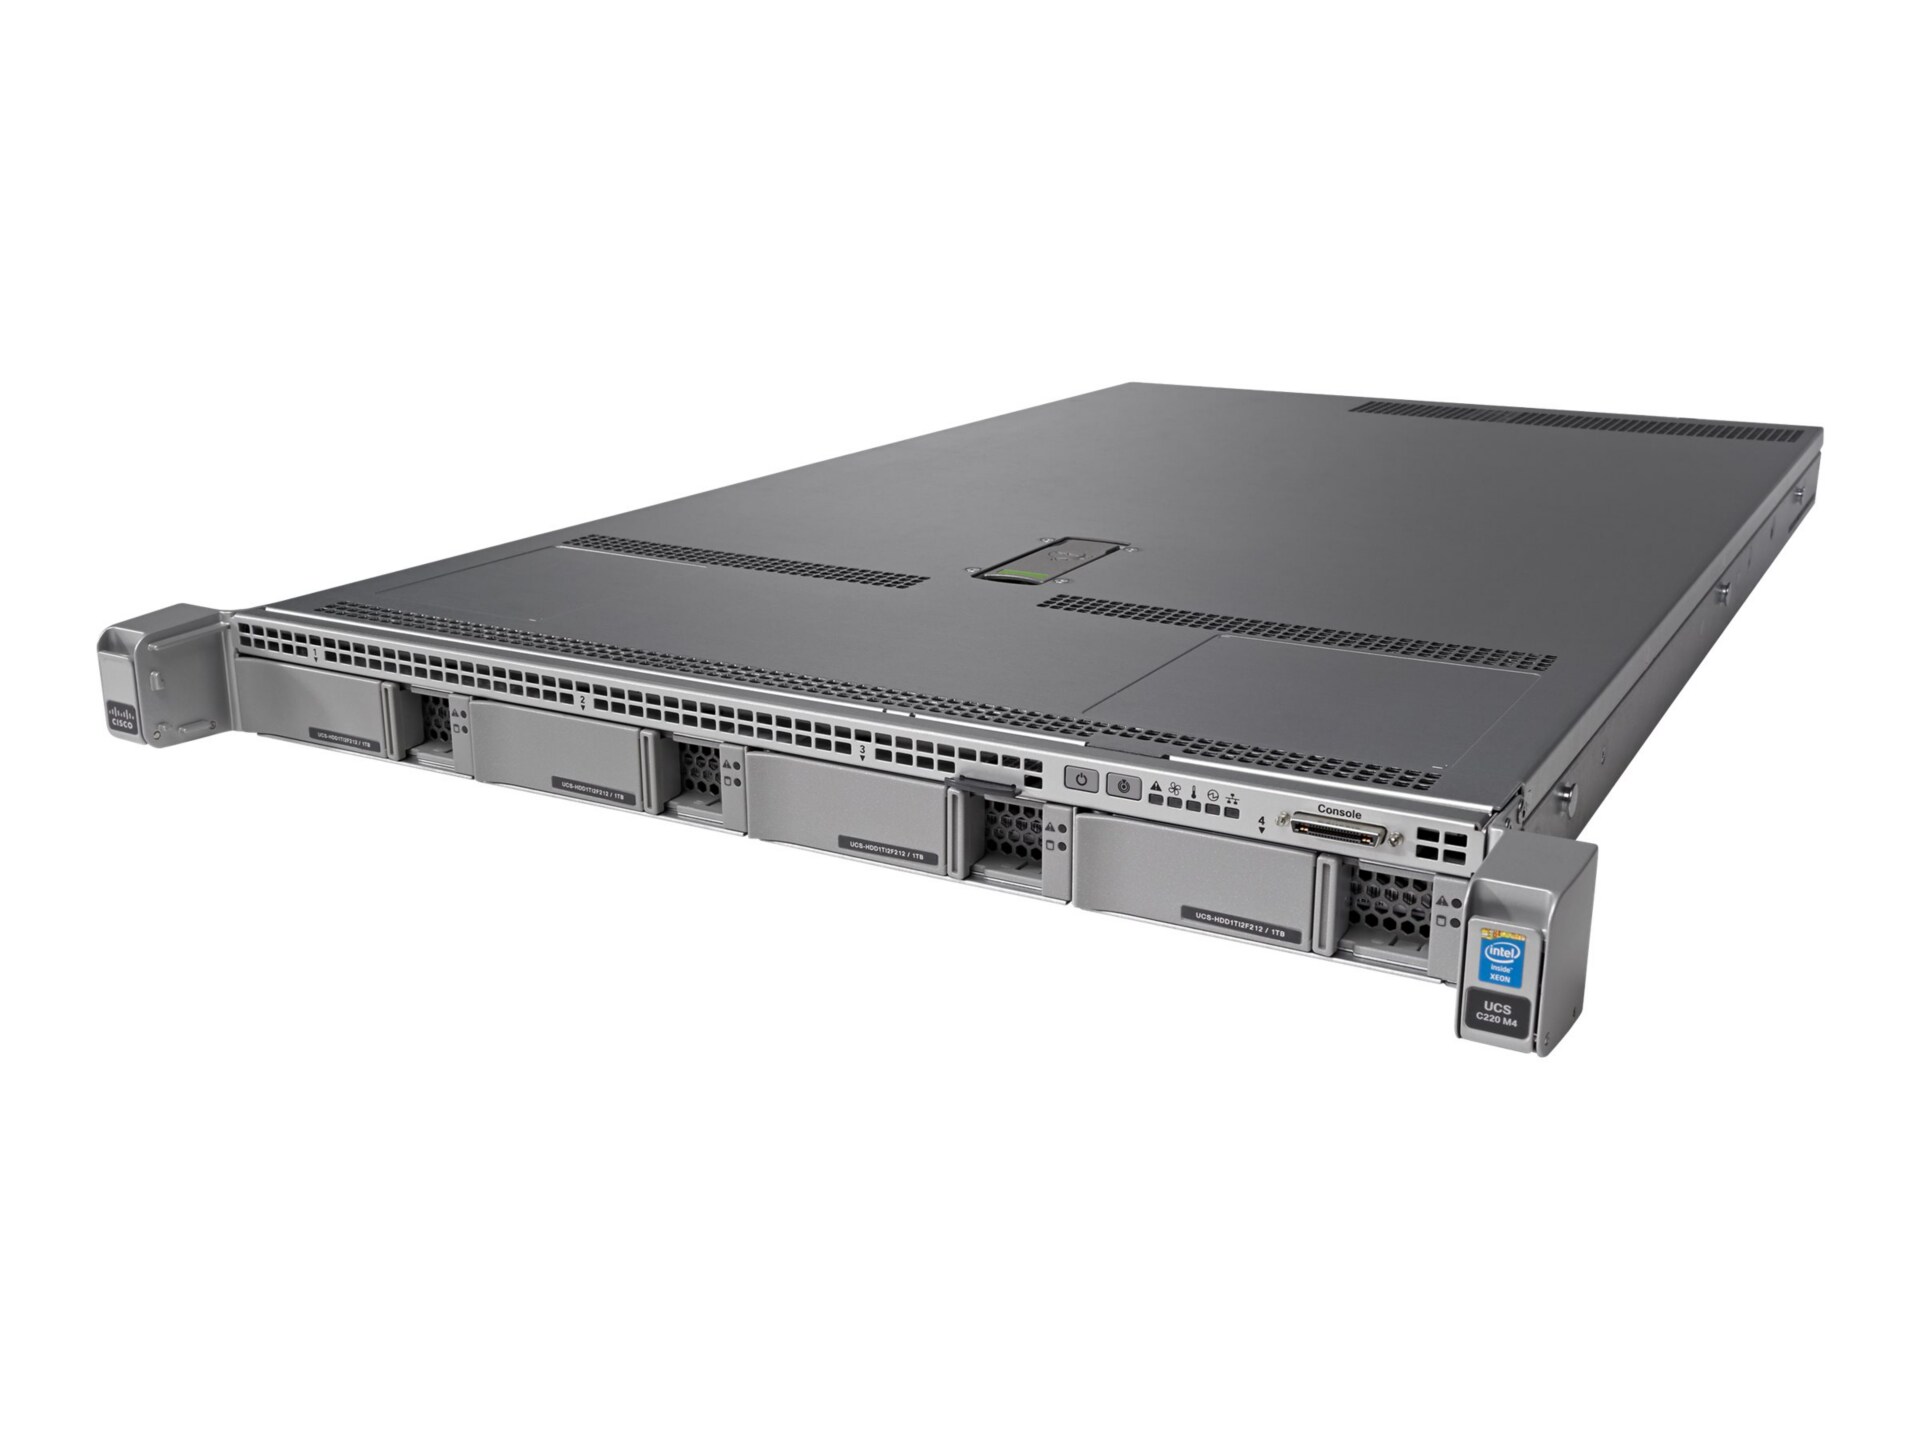 Cisco UCS Smart Play 8 C220 M4 SFF Entry Expansion Pack - rack-mountable - Xeon E5-2609V3 1.9 GHz - 64 GB - no HDD